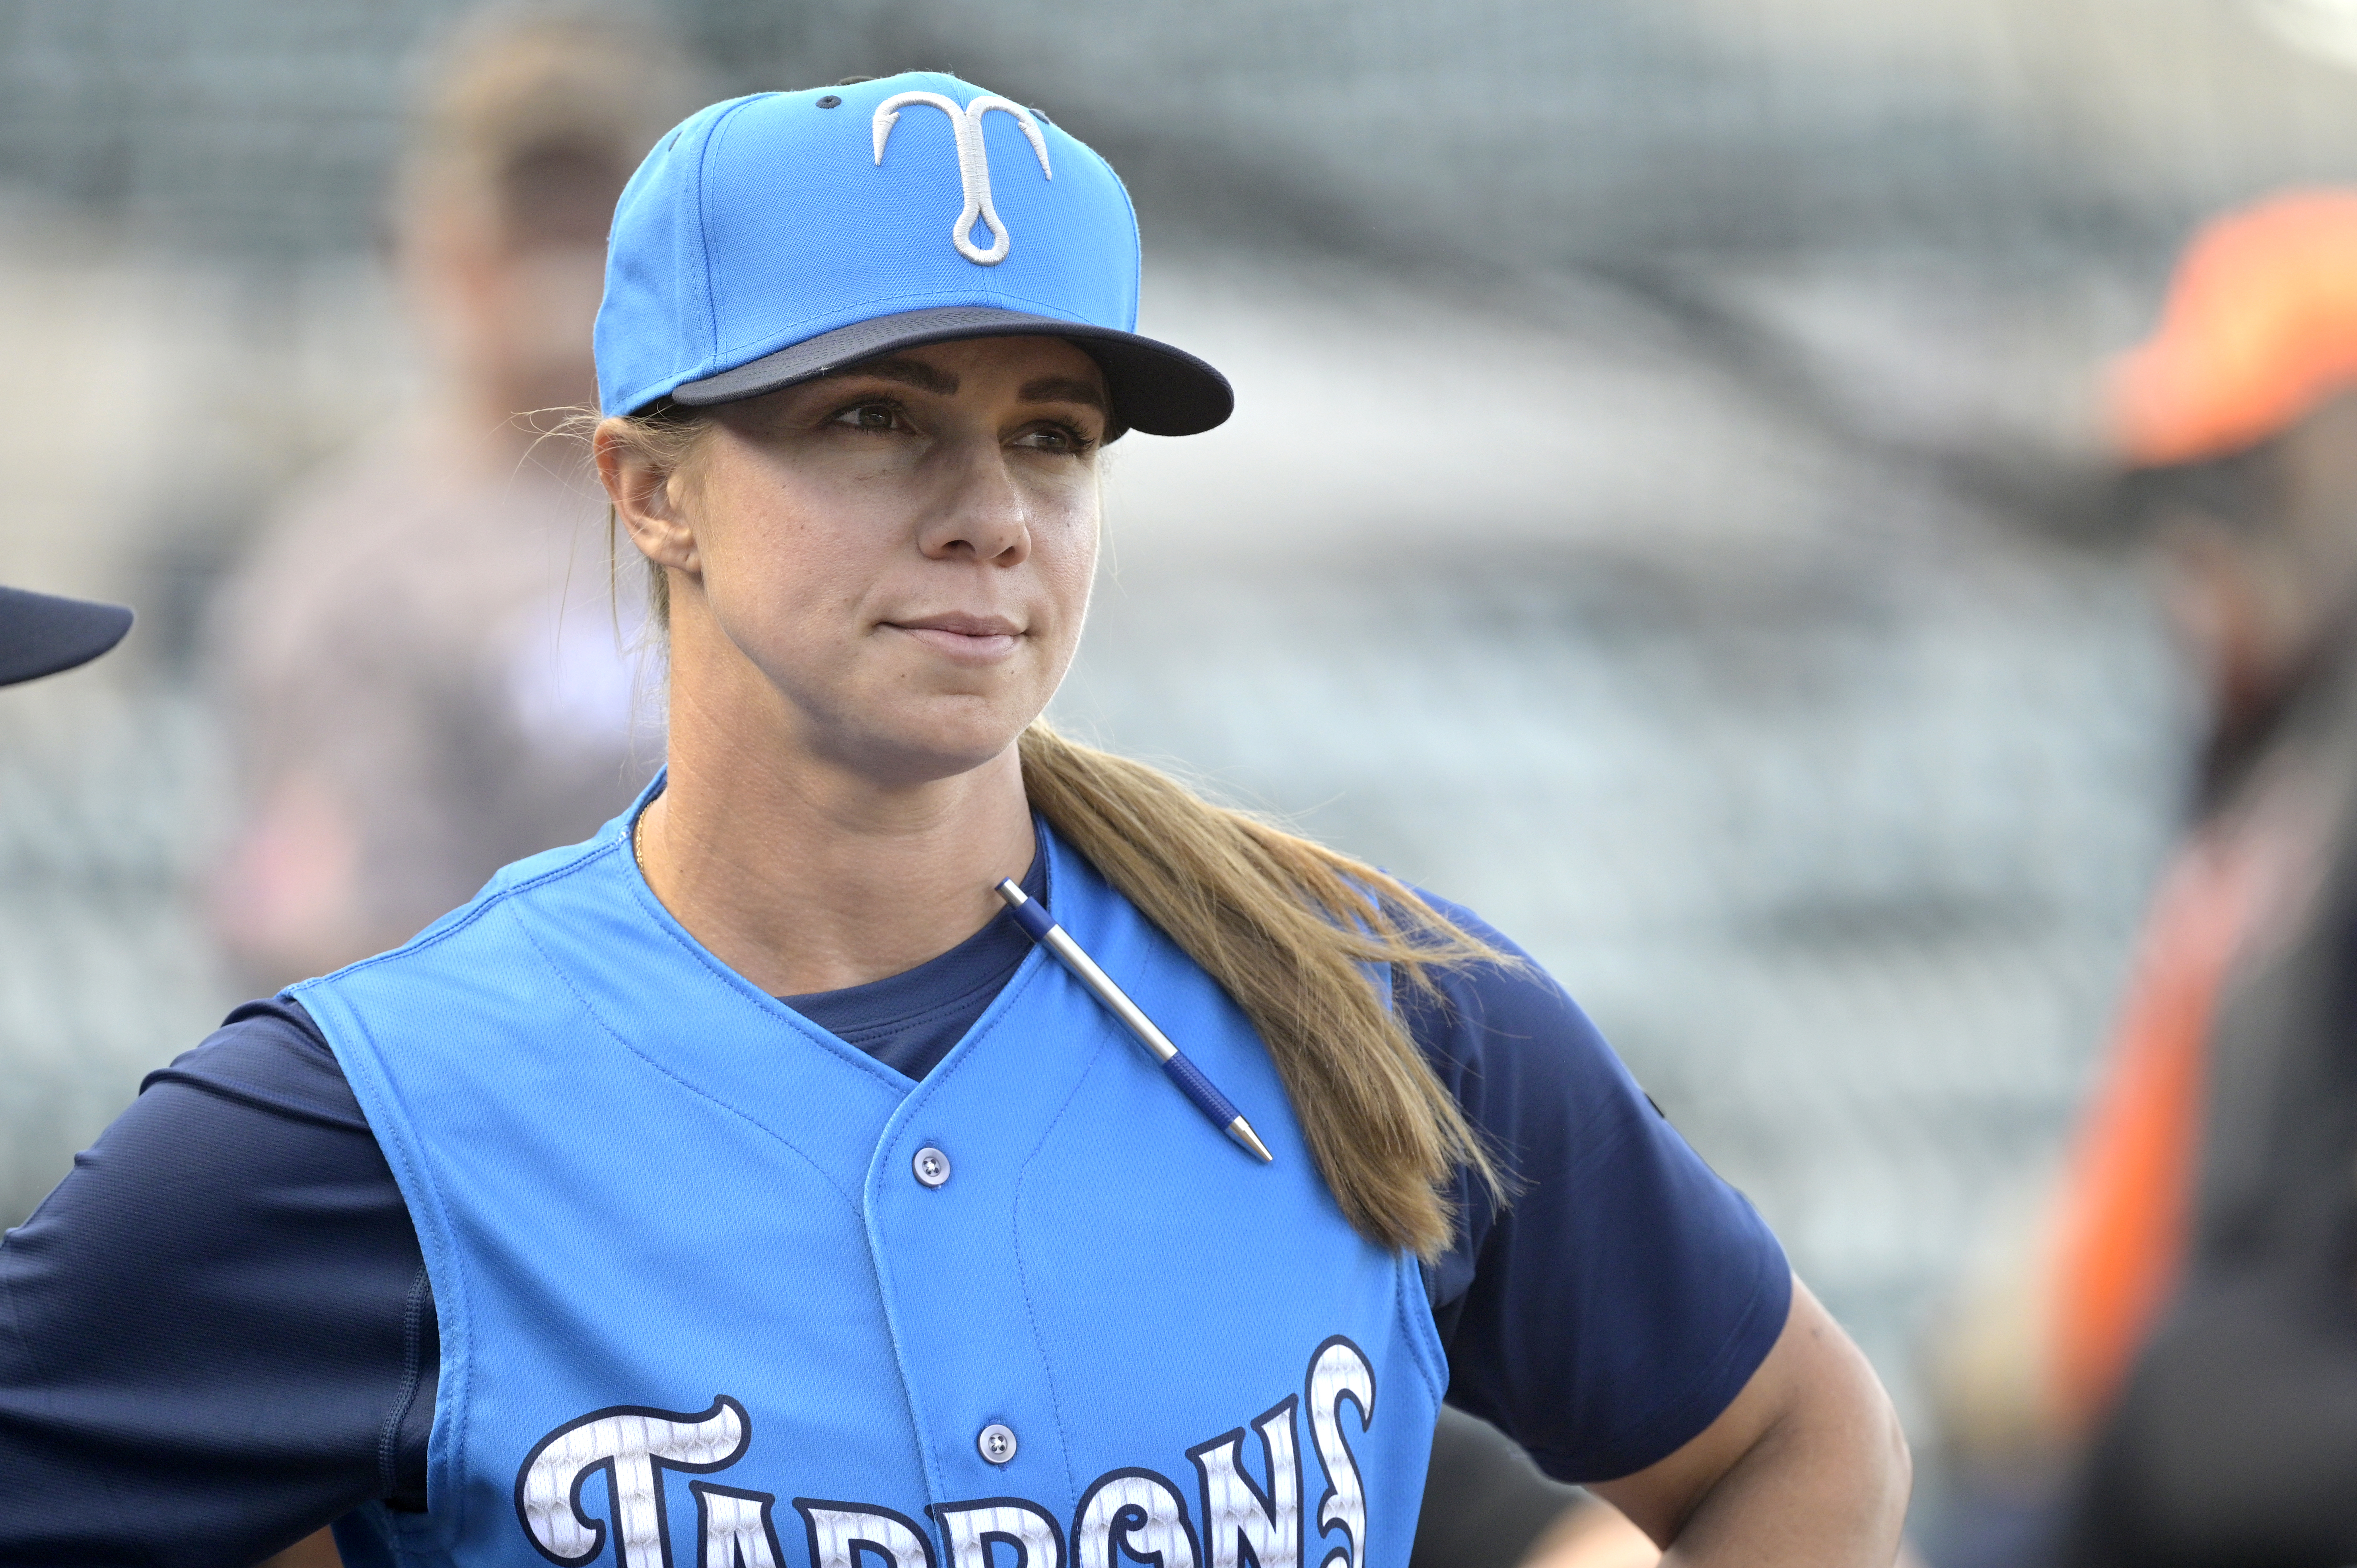 In the middle of it': Tampa Tarpons' Balkovec is first woman to lead MLB  affiliate